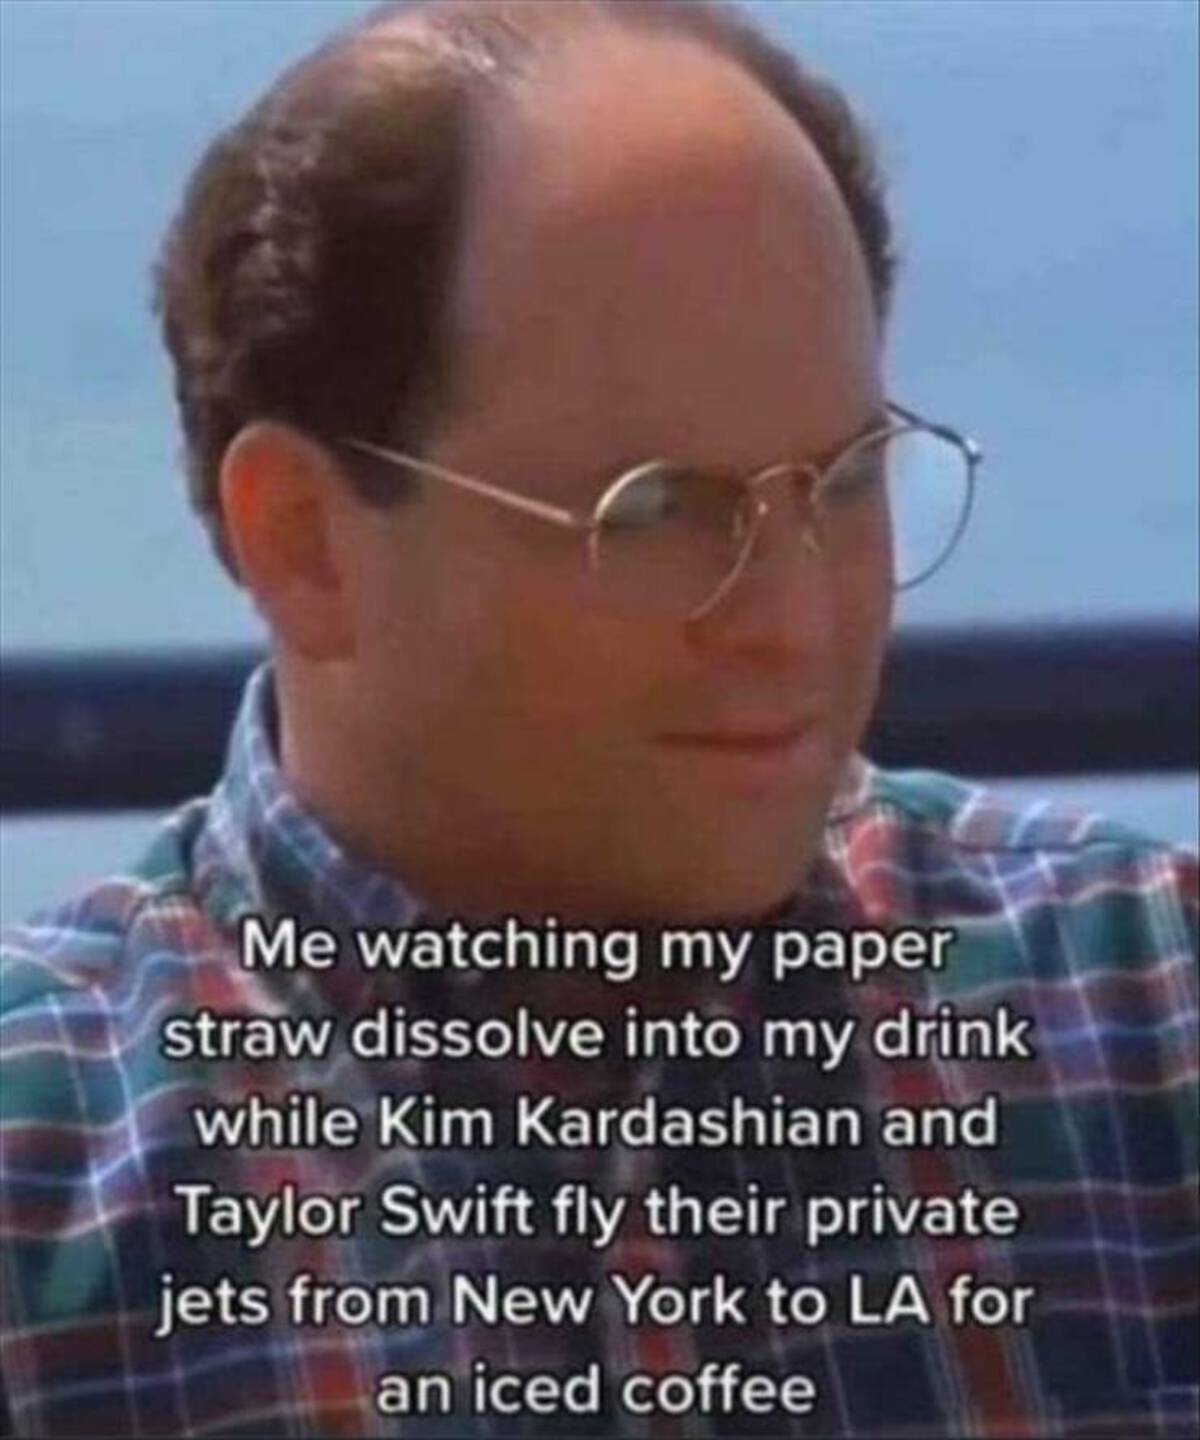 photo caption - Me watching my paper straw dissolve into my drink while Kim Kardashian and Taylor Swift fly their private jets from New York to La for an iced coffee